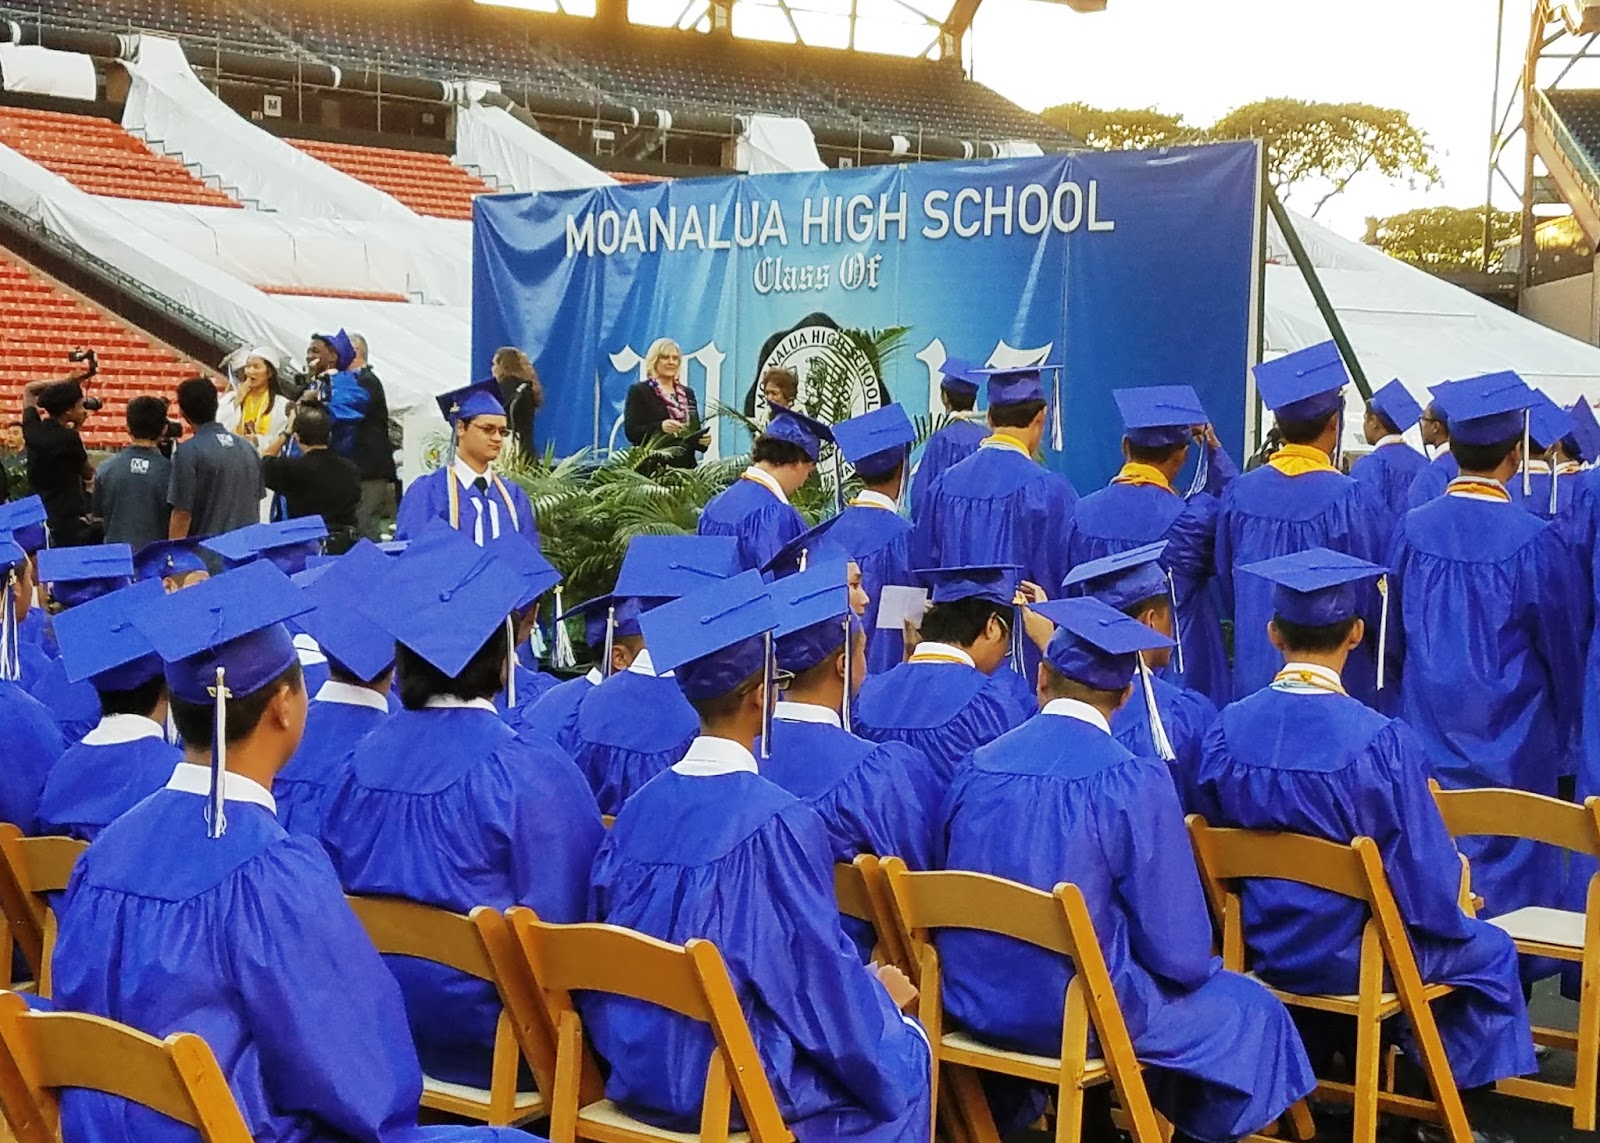 Moanalua High School Student Association 5/22 COMMENCEMENT HISTORY MADE!